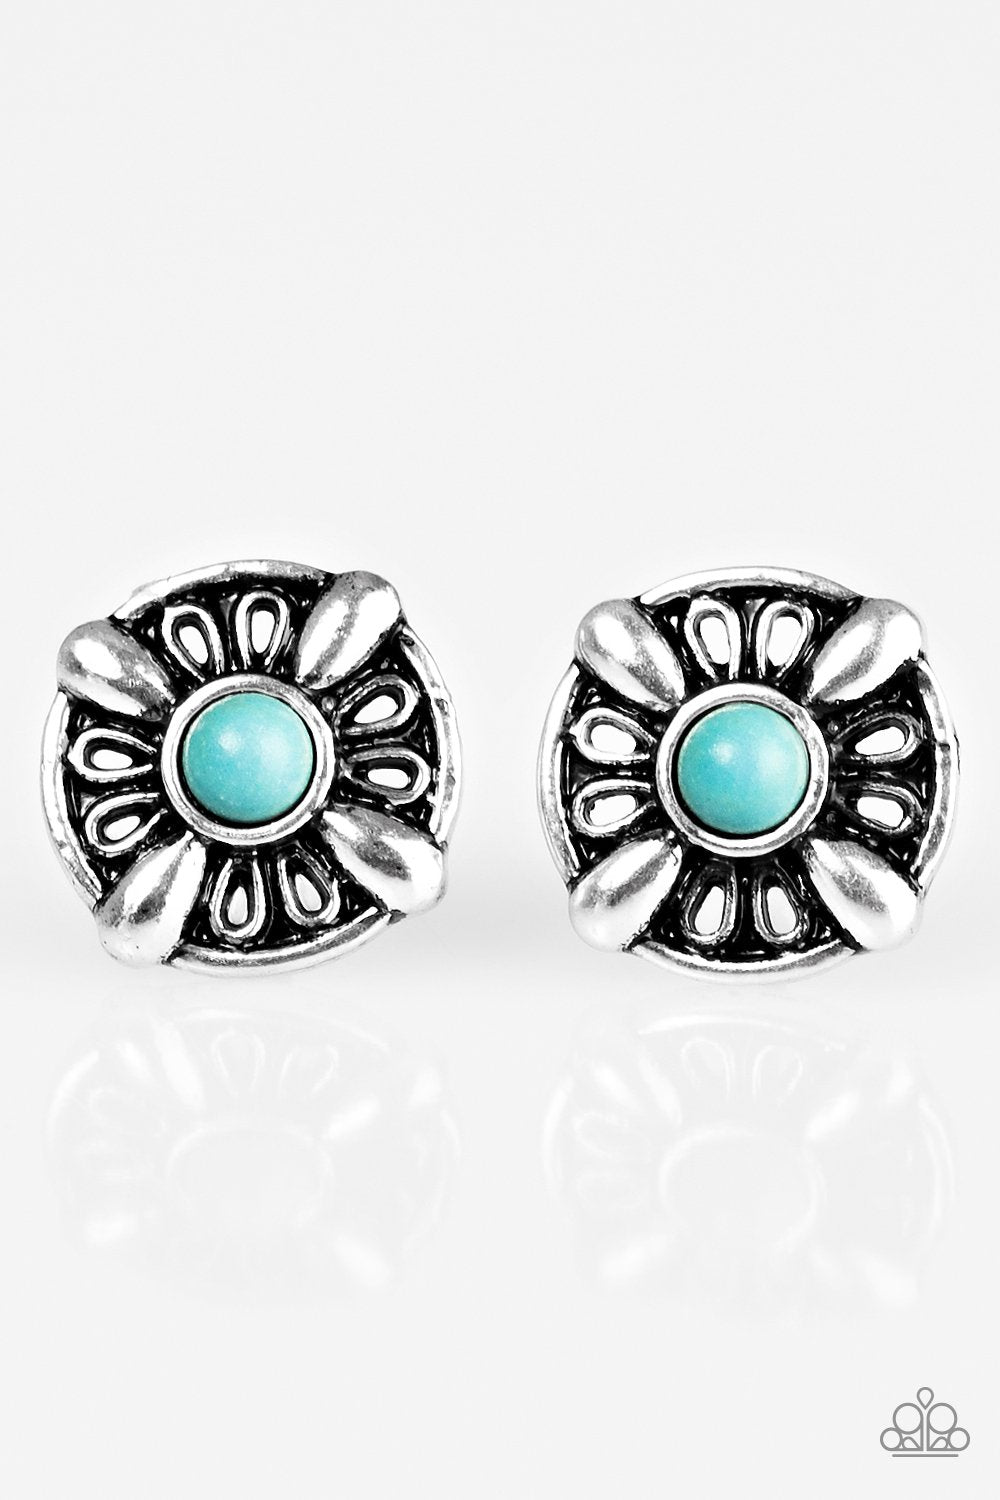 West Kept Secret Silver and Blue Post Earrings - Paparazzi Accessories-CarasShop.com - $5 Jewelry by Cara Jewels